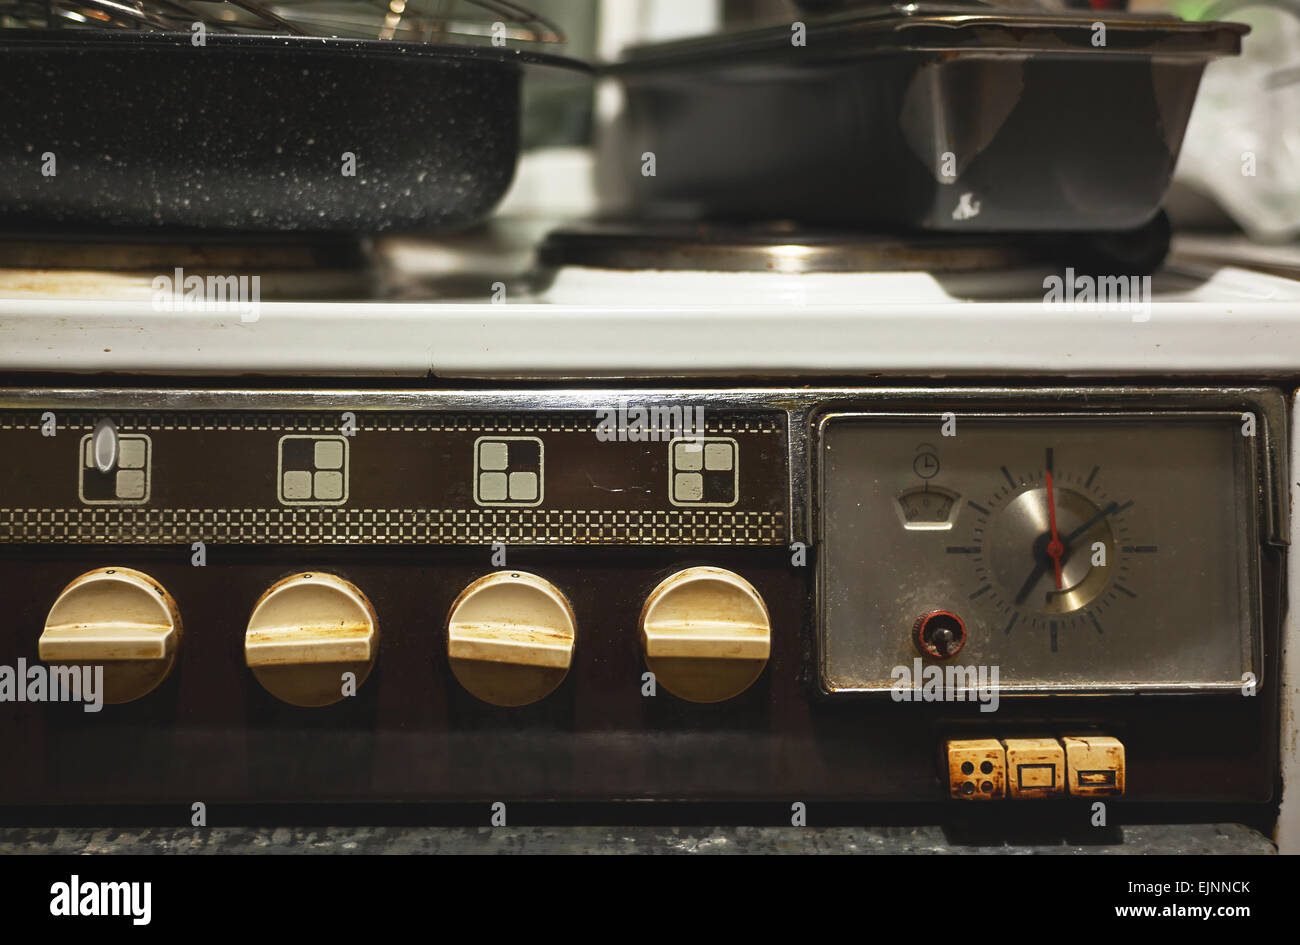 Details of an old stove, dirty of cooking, with dishes on top. Stock Photo